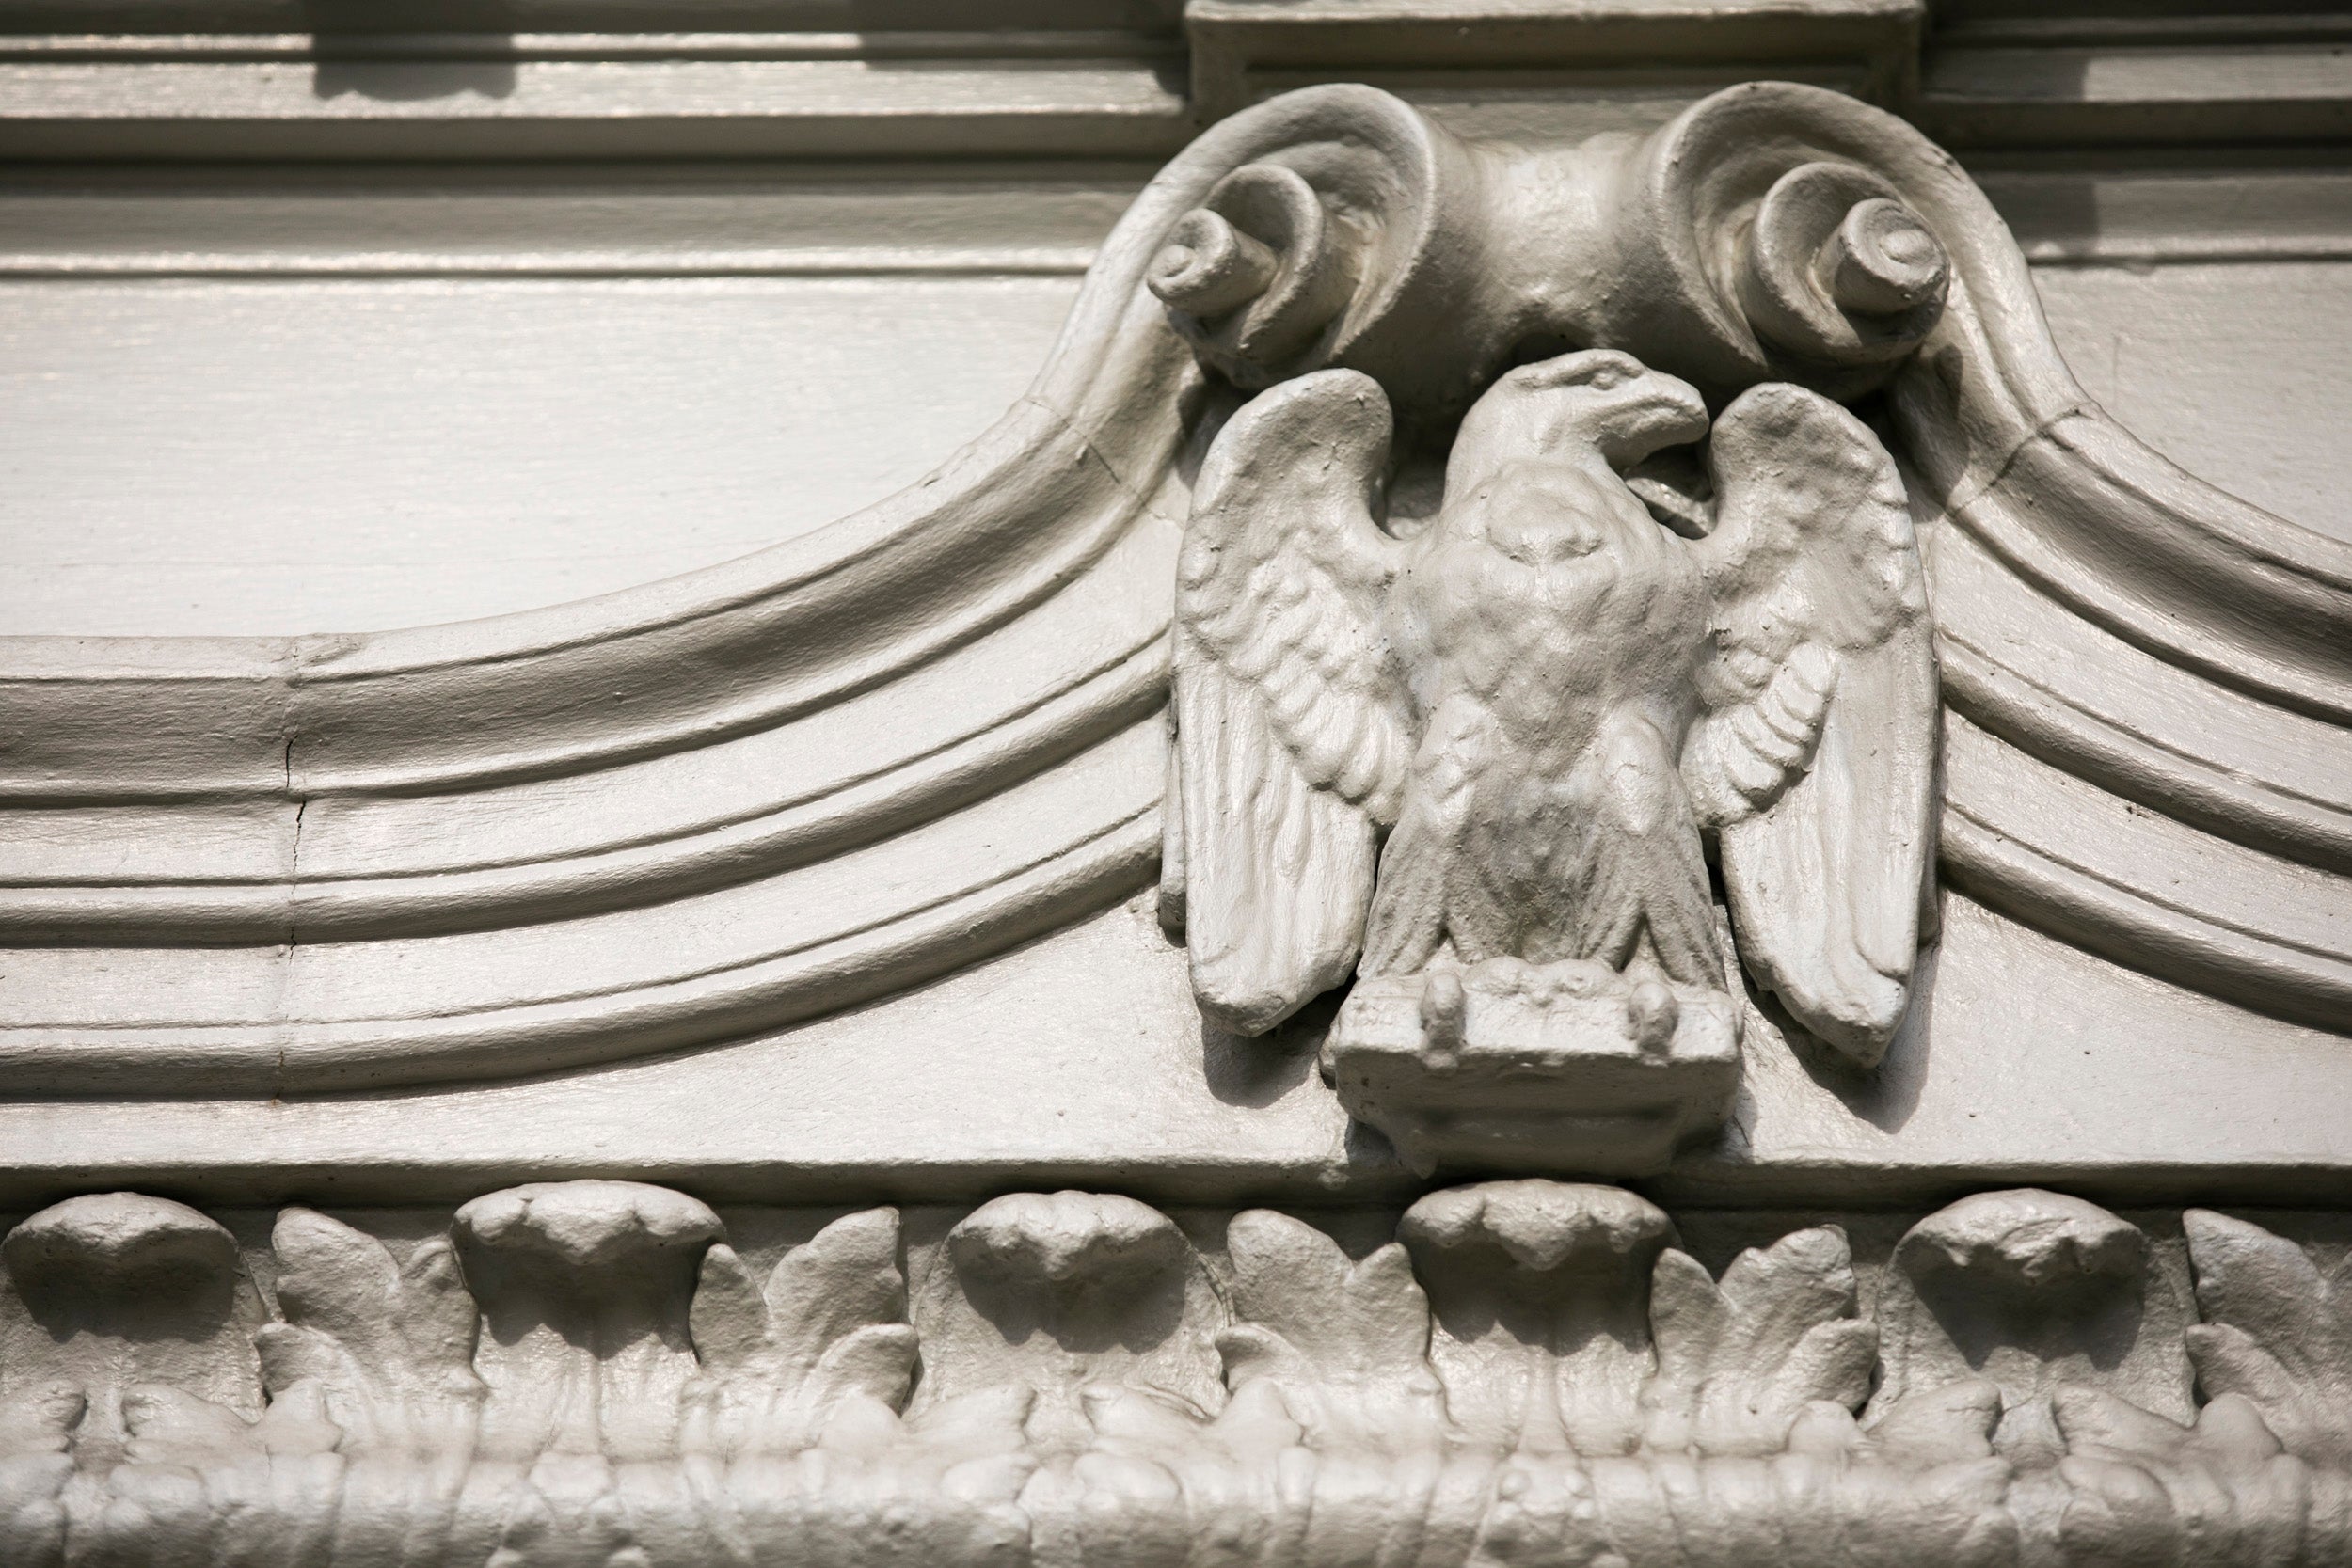 An eagle decorates the exterior of Leverett House.